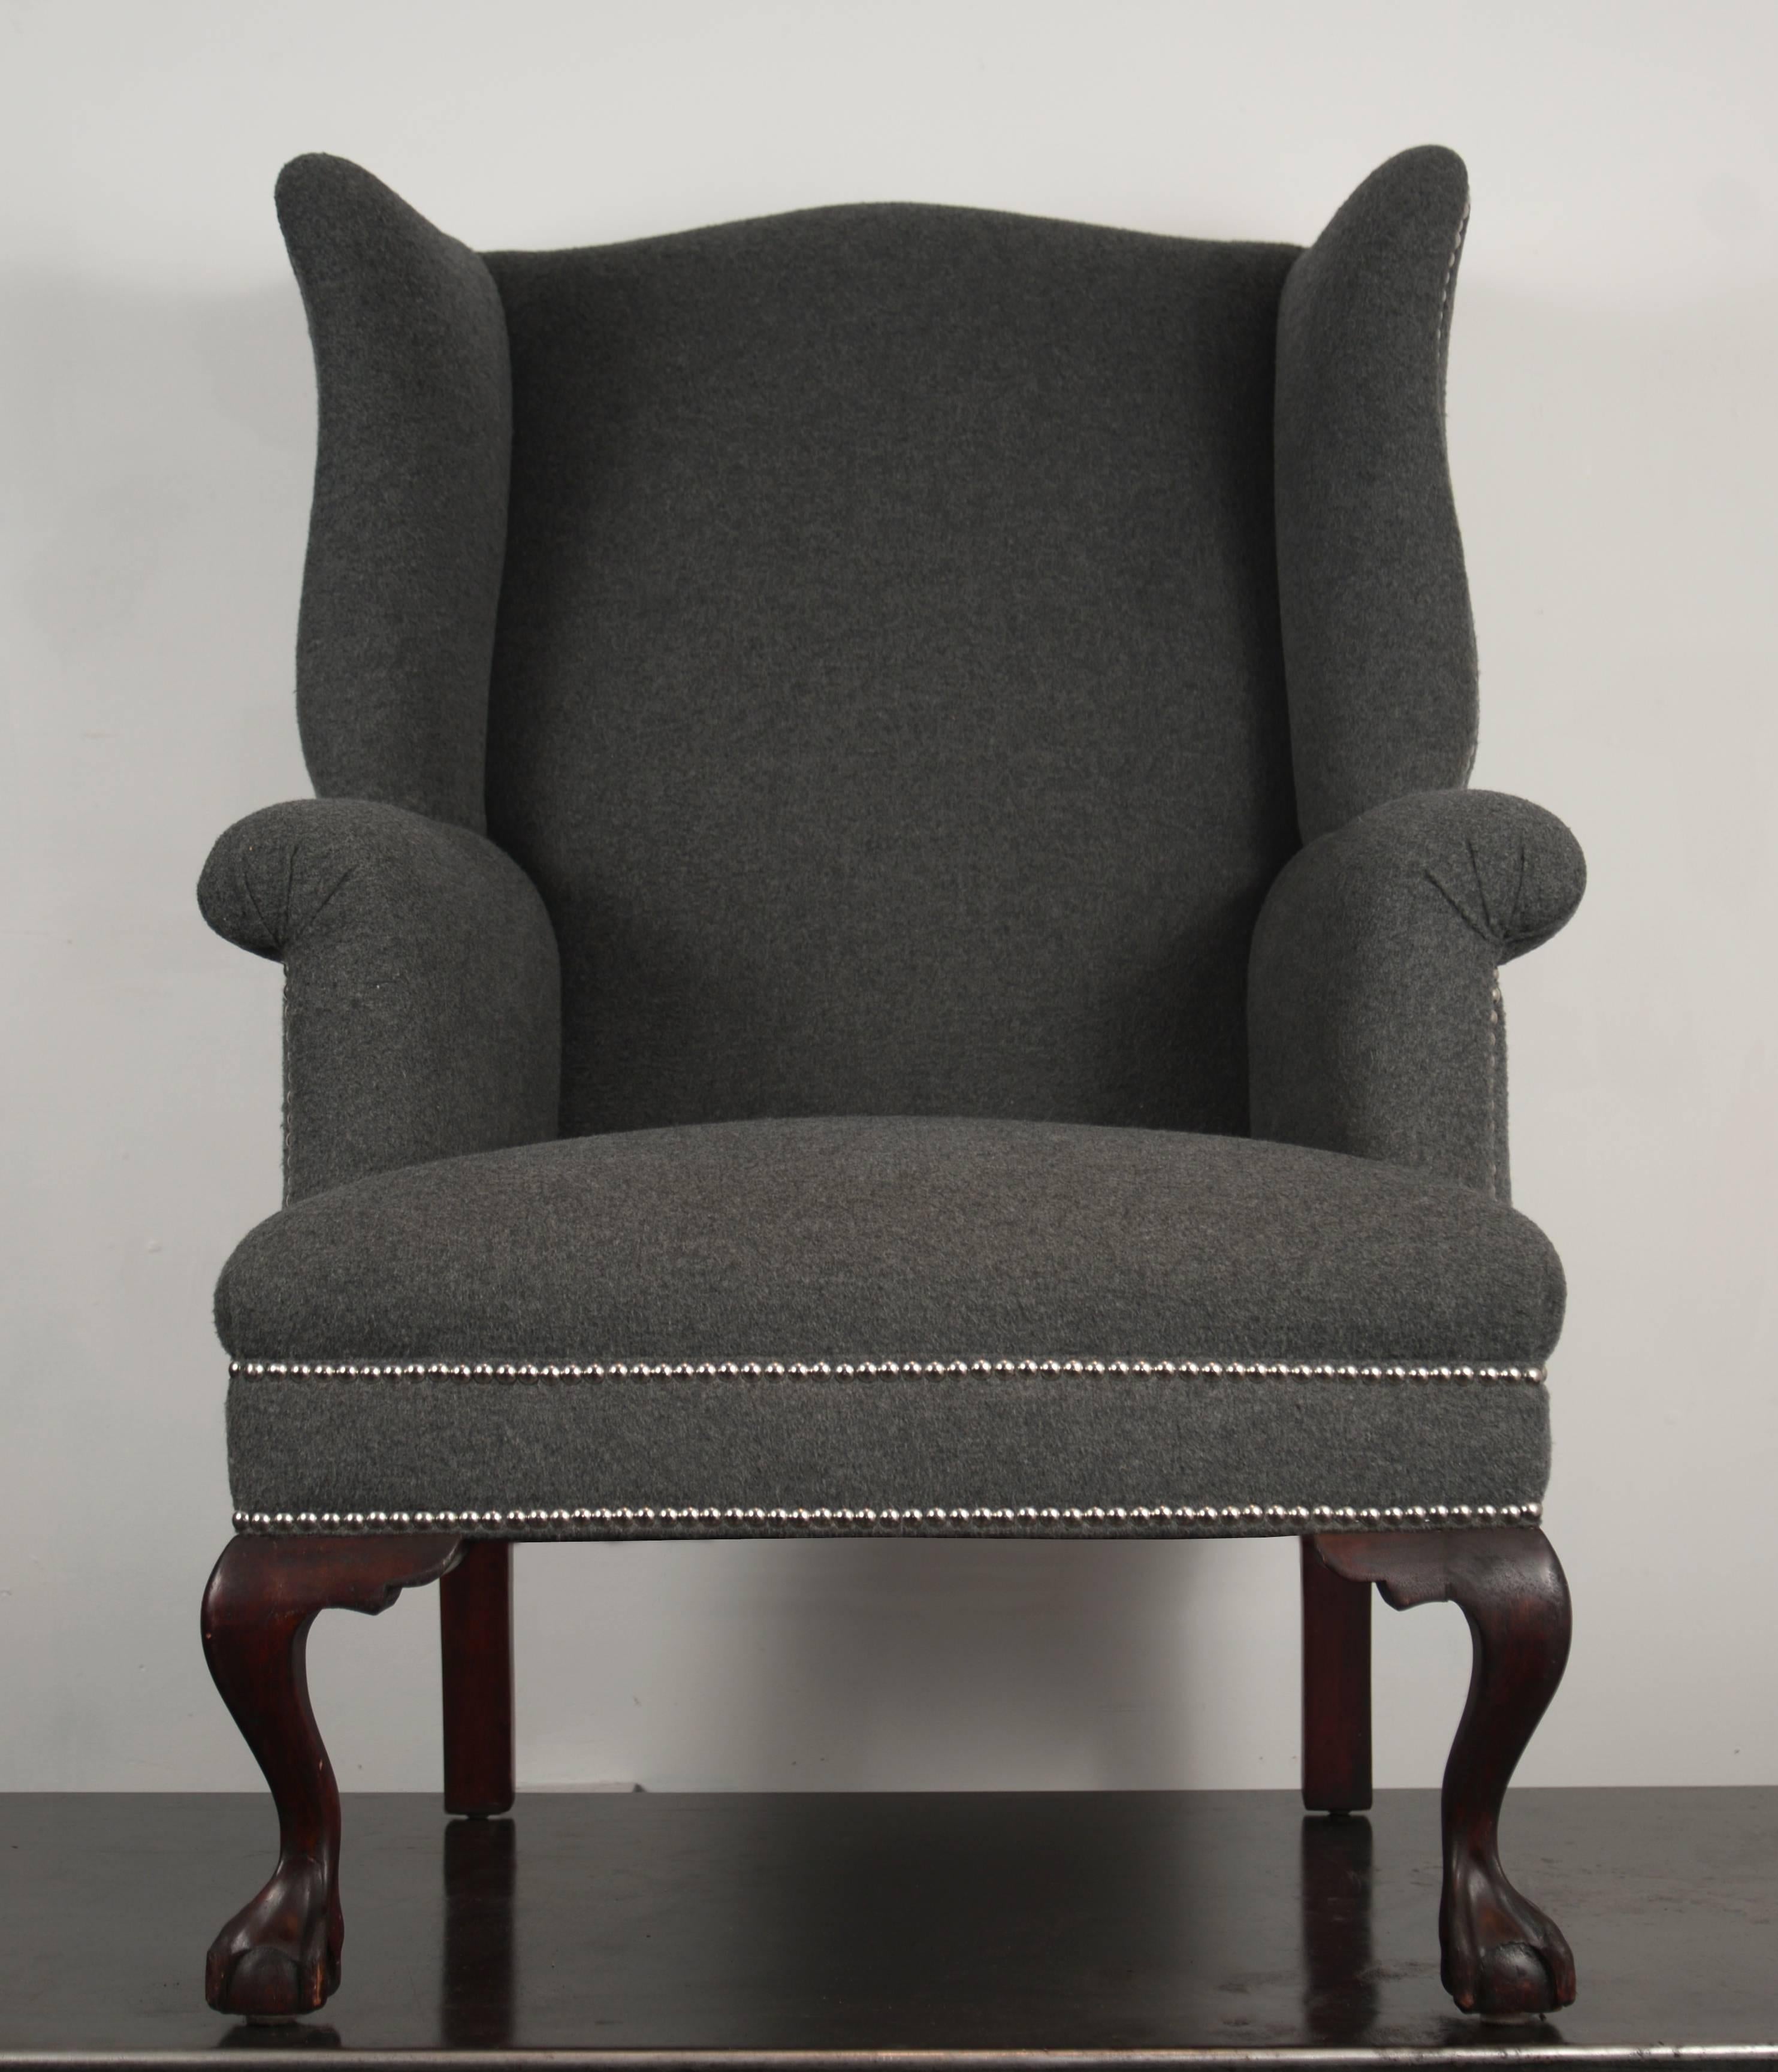 Upholstery 19th Century Wingback Chairs in Cashmere/Wool Blend For Sale